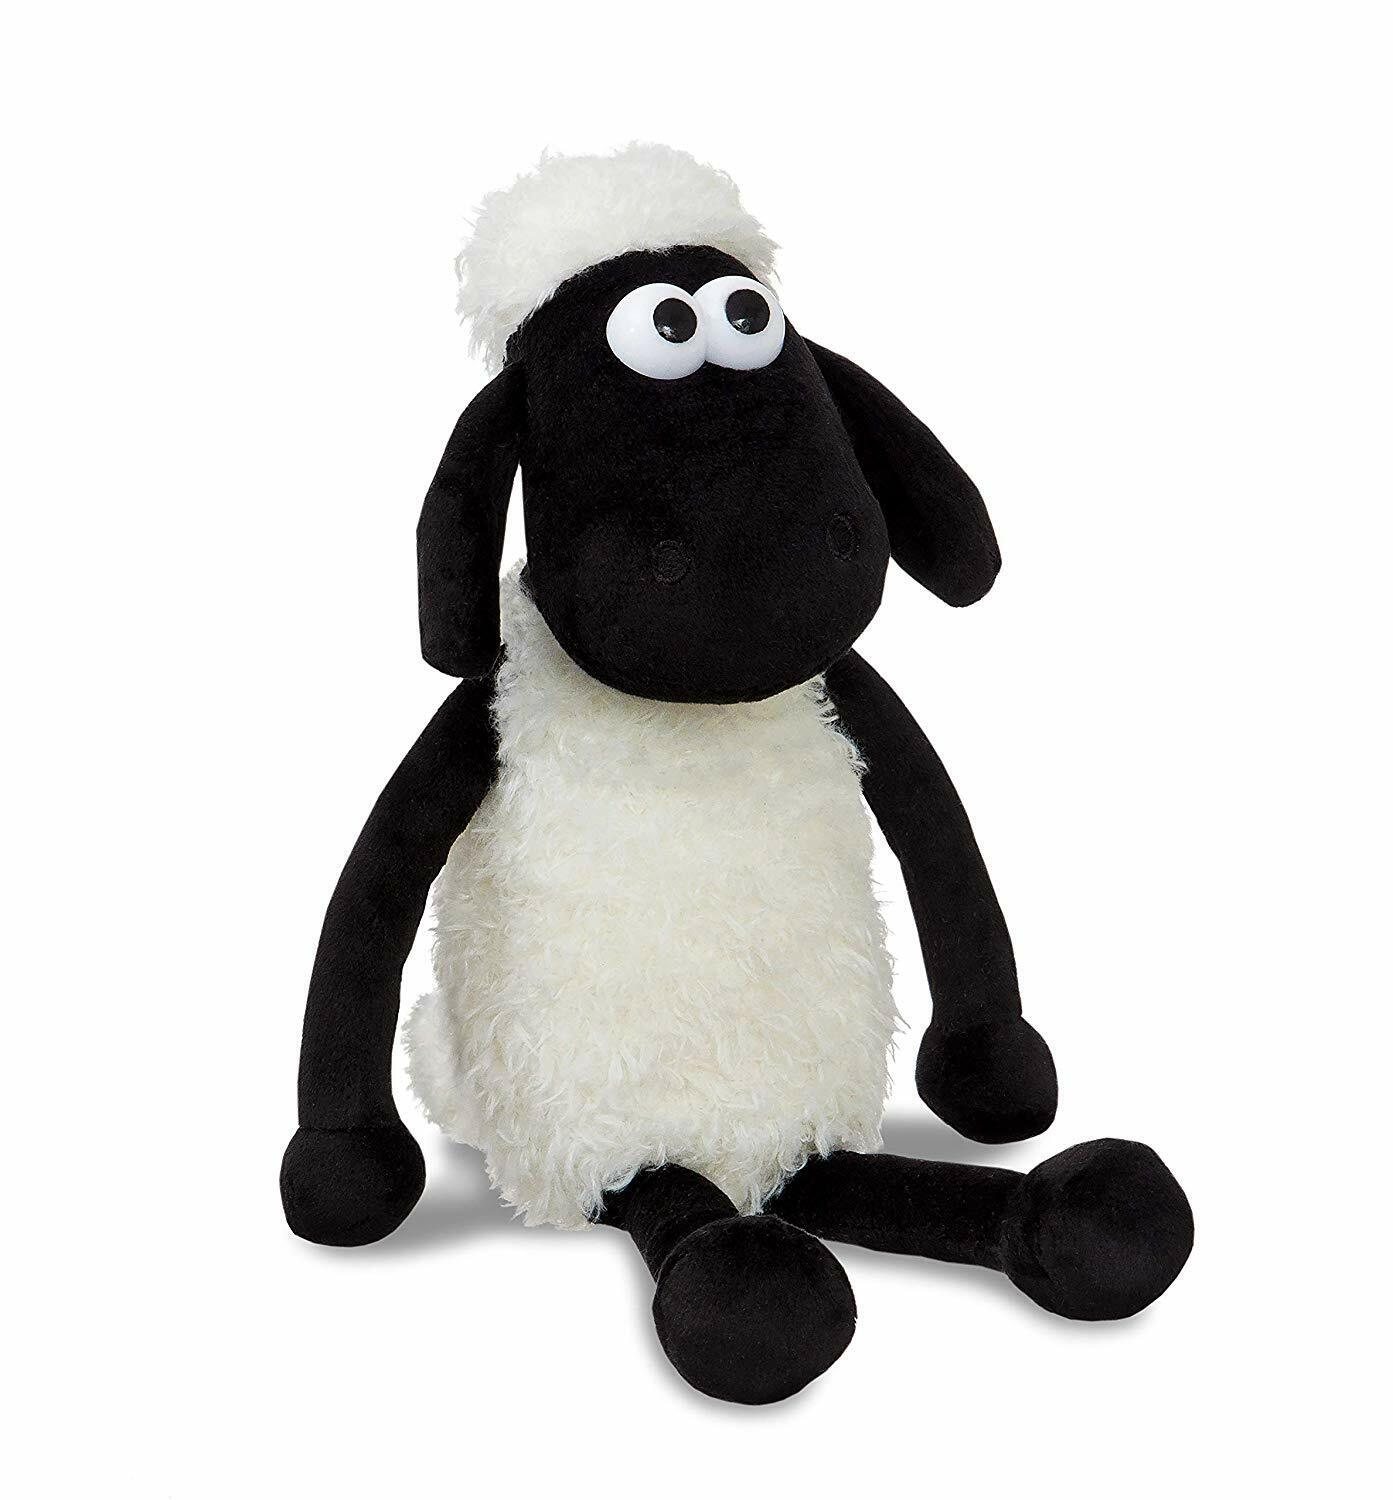 New Shaun the Sheep 8-Inch Plush Soft Toy - Adorable and Cuddly!